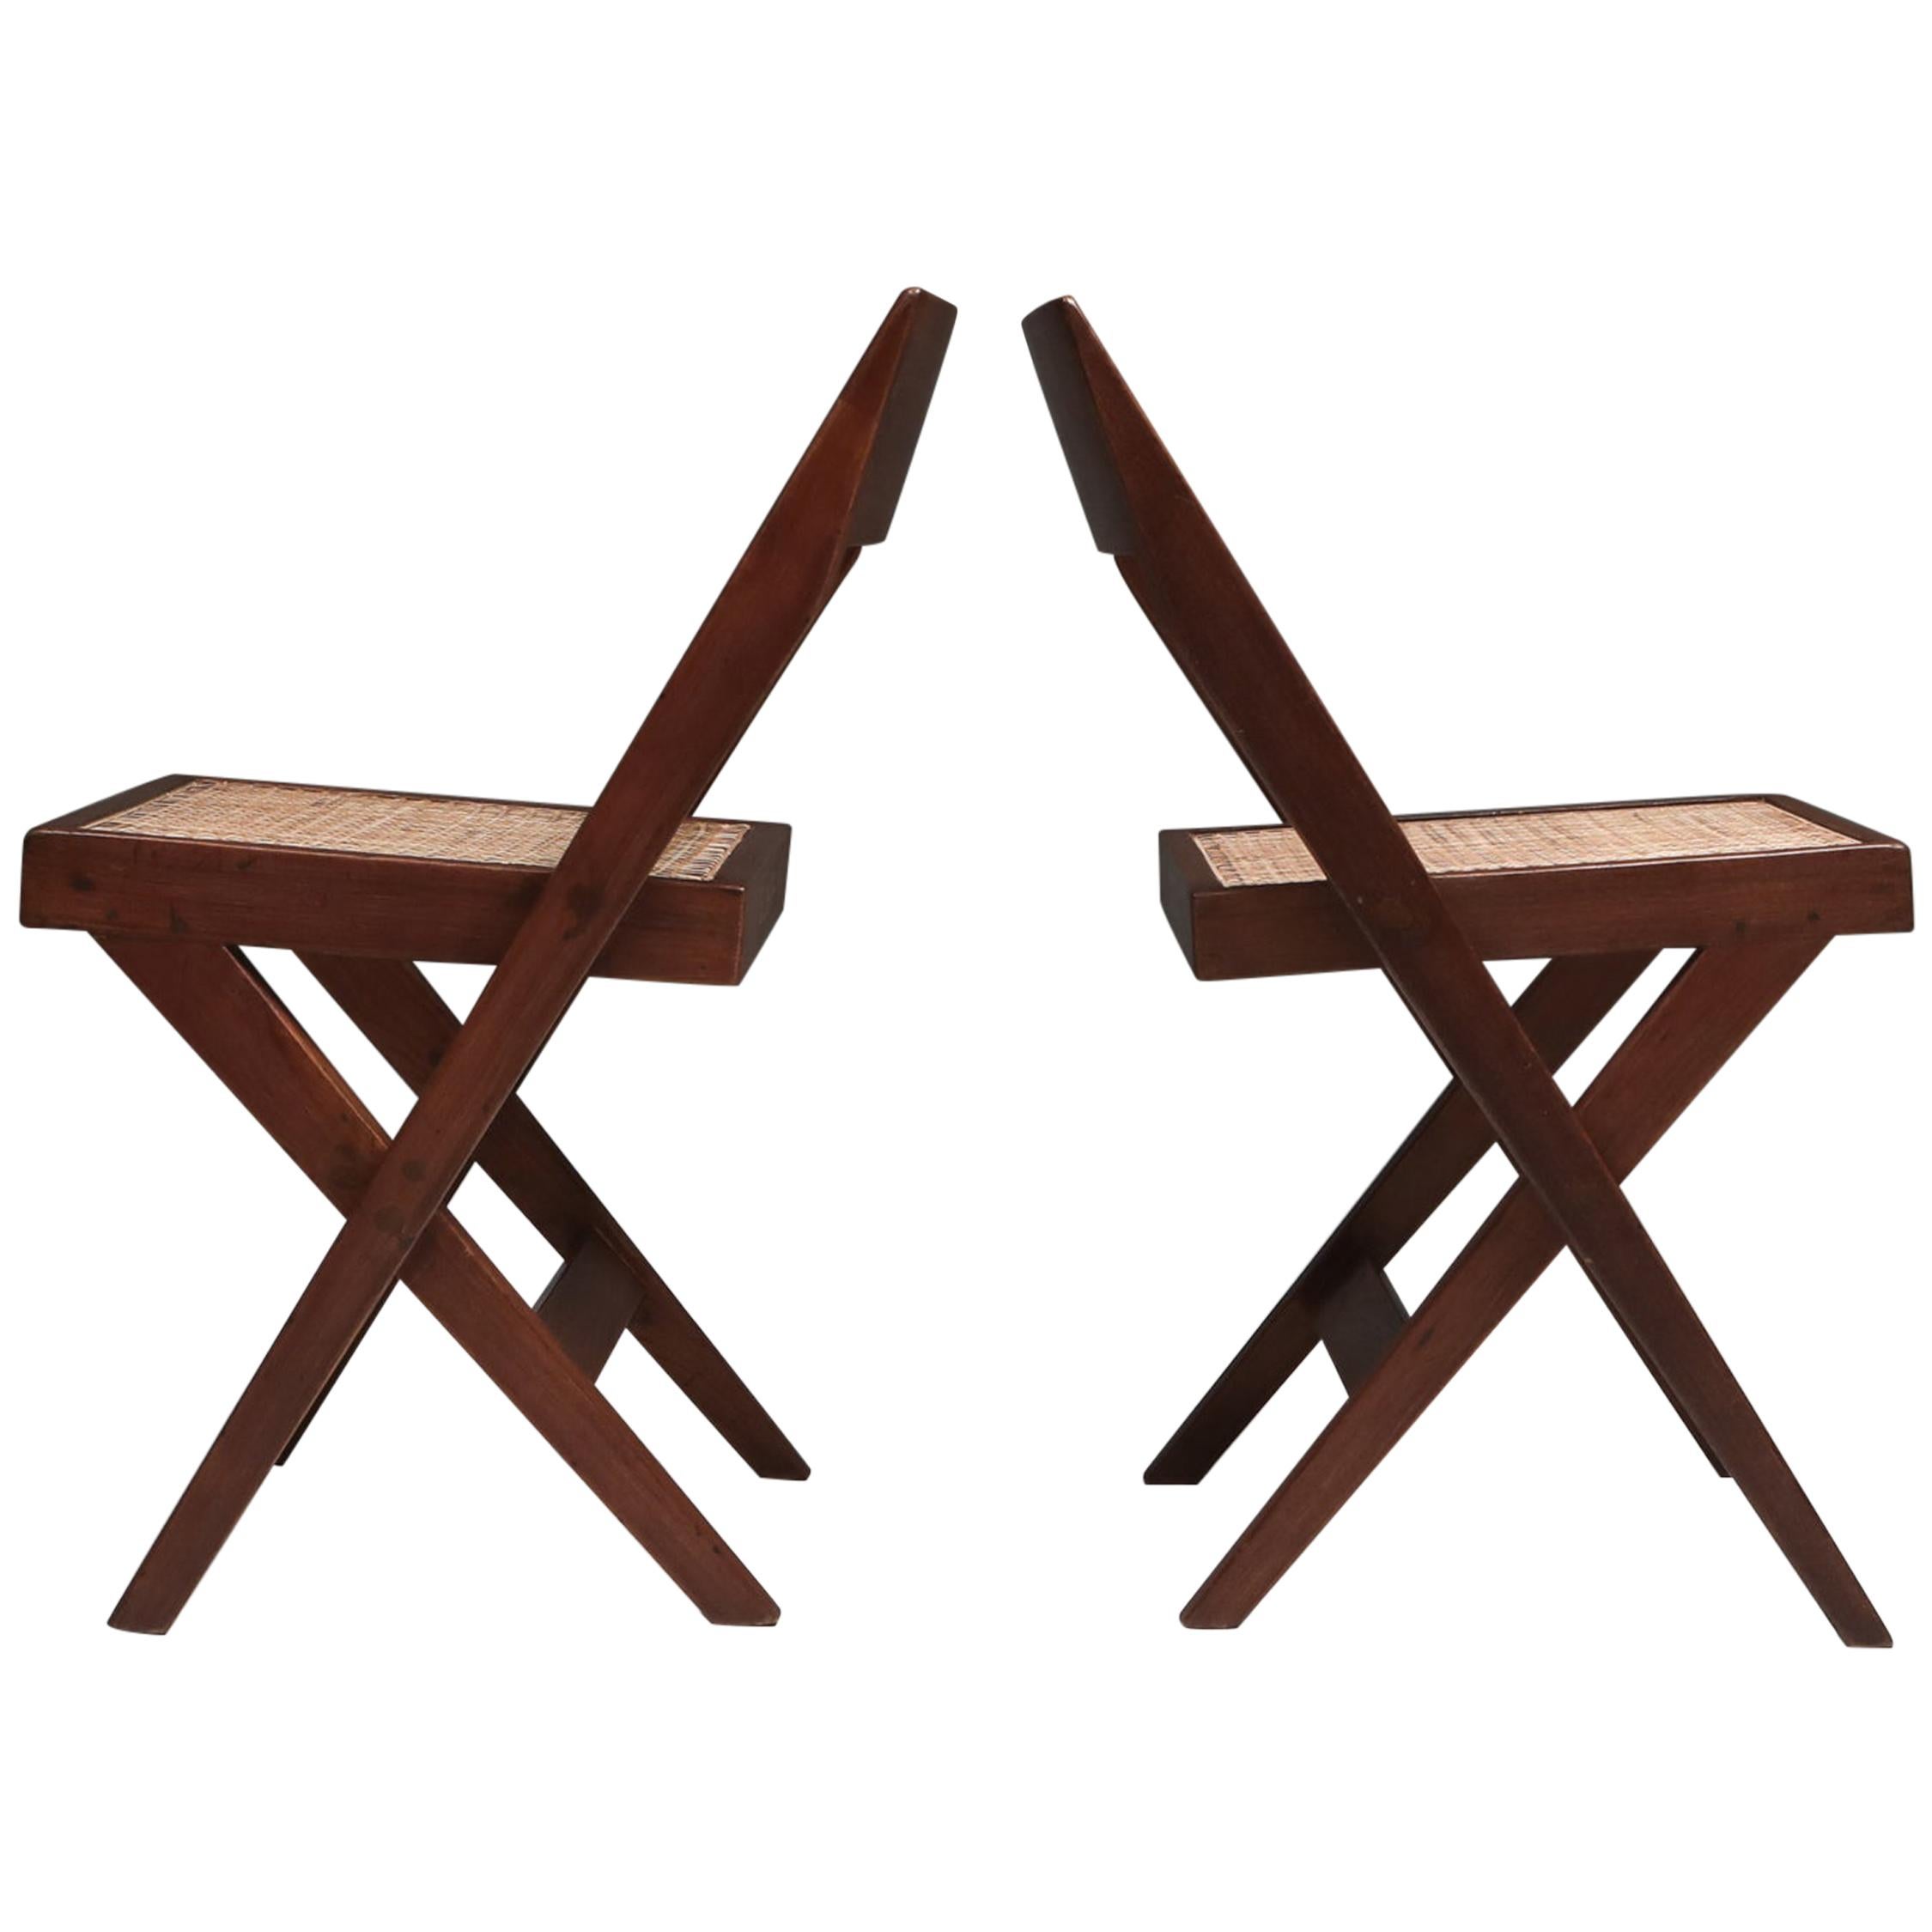 Library Chair by Pierre Jeanneret, a Pair